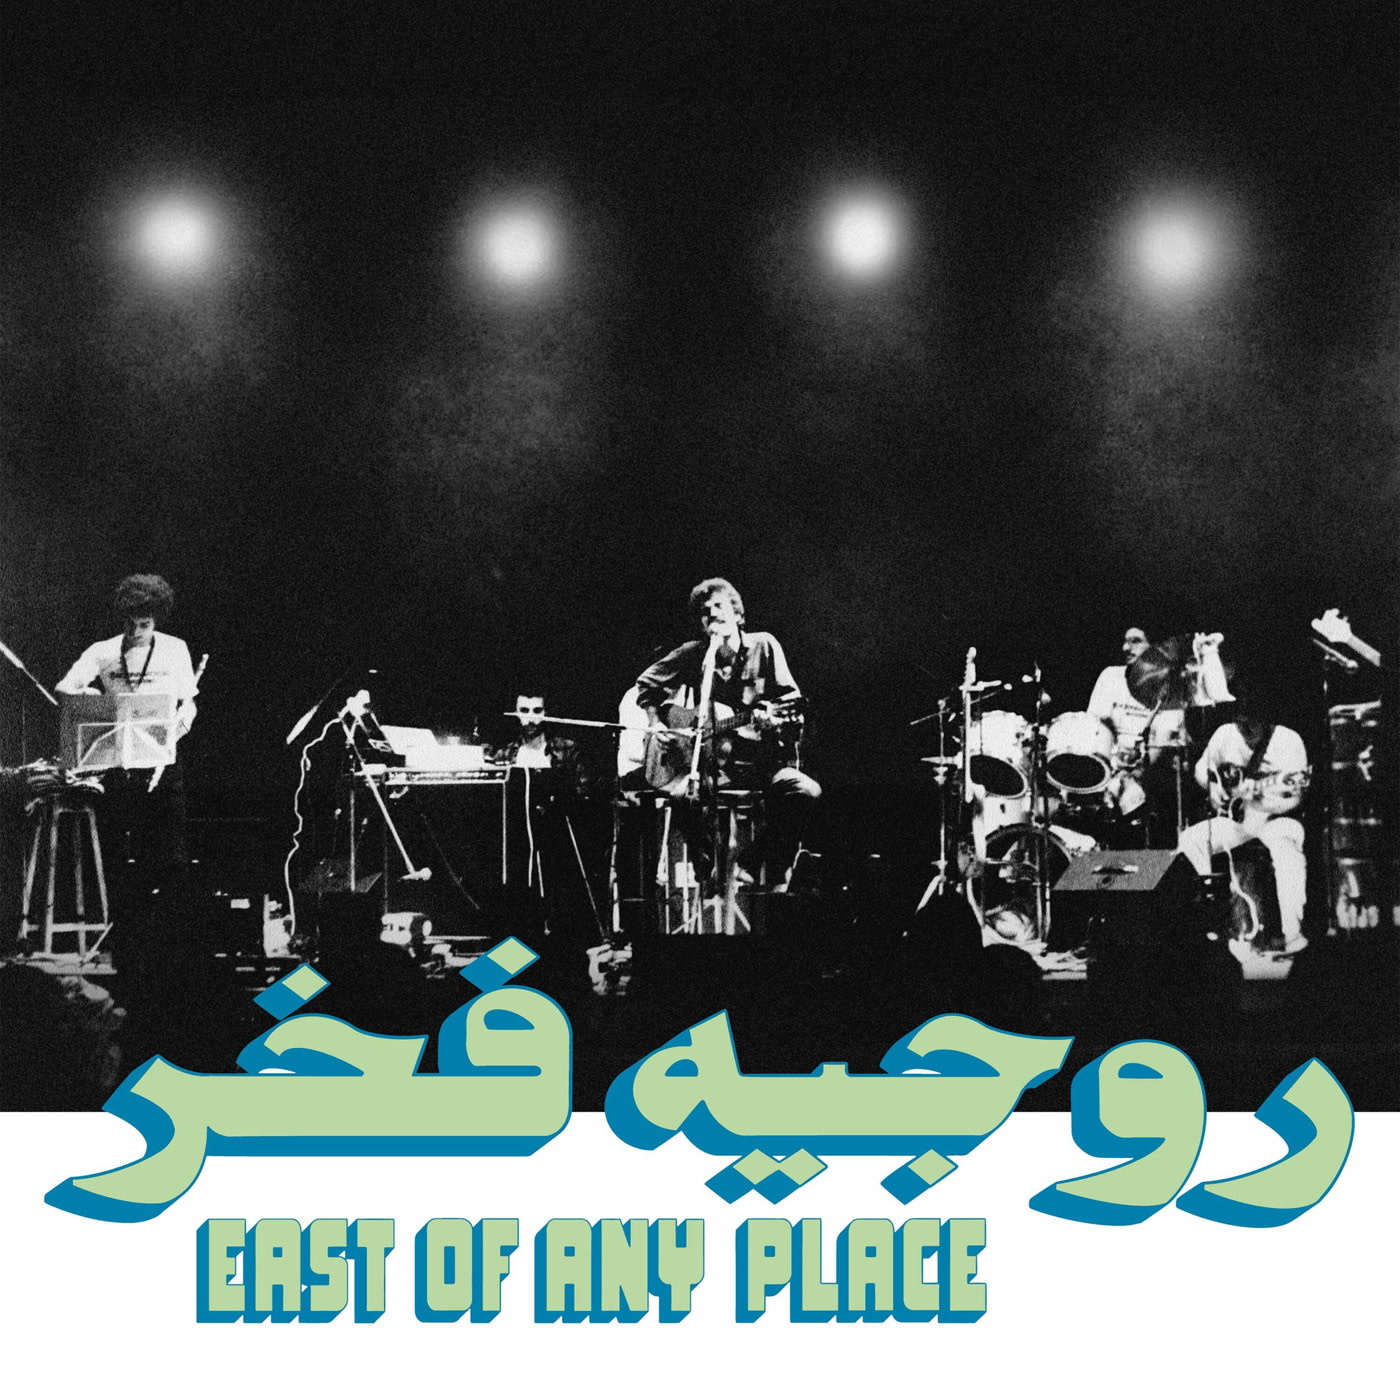 Habibi Funk Roger Fakhr - East of Any Place